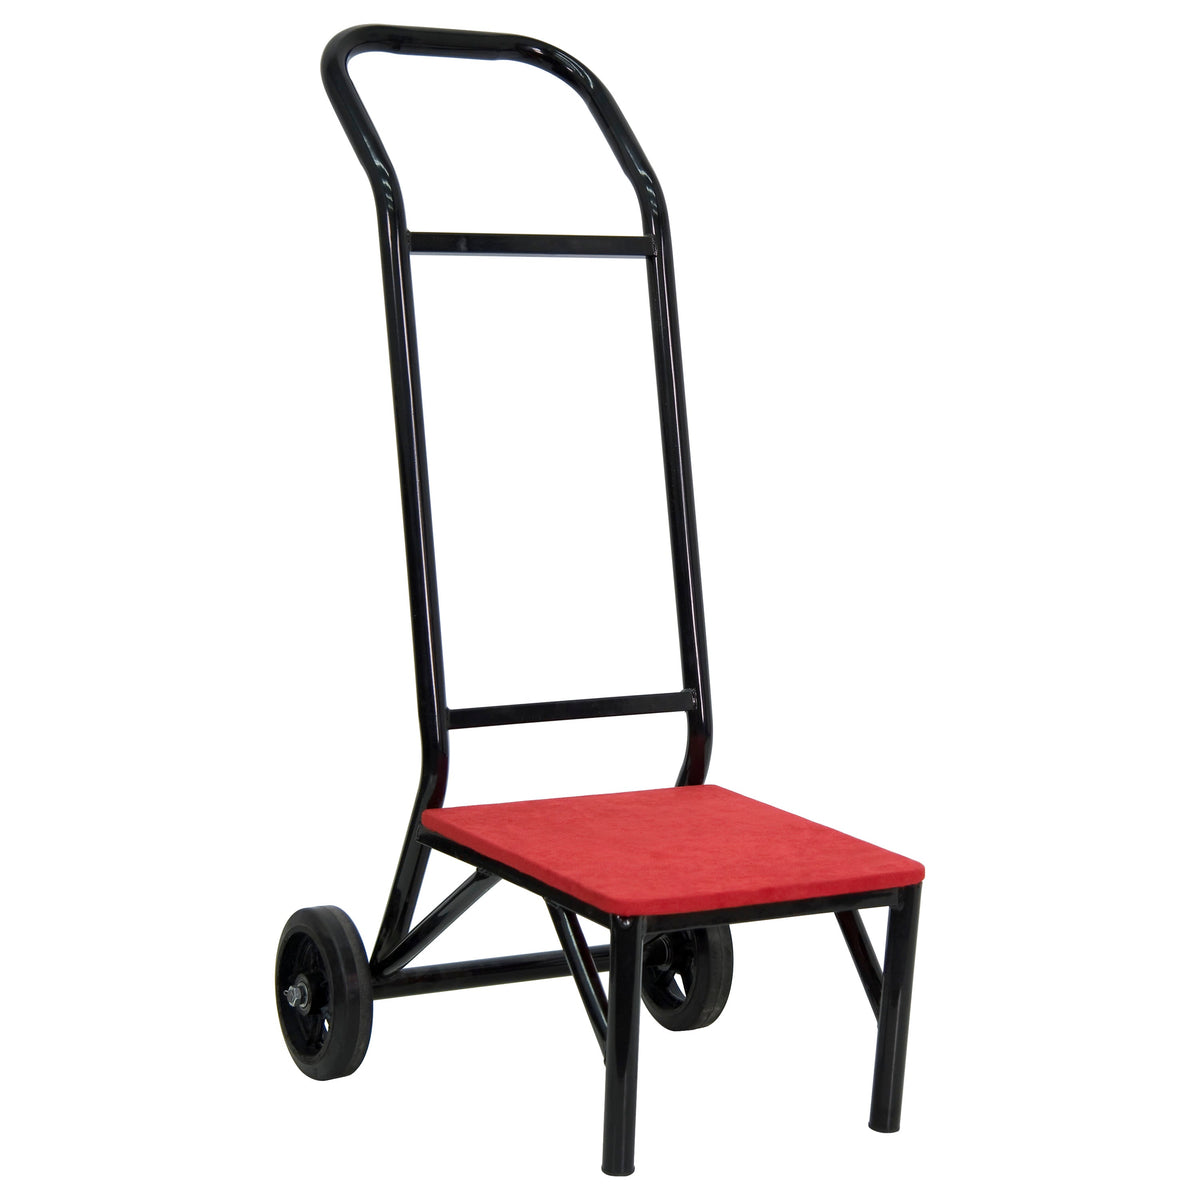 Banquet Chair / Stack Chair Dolly - Material Handling Equipment - Handled Dolly